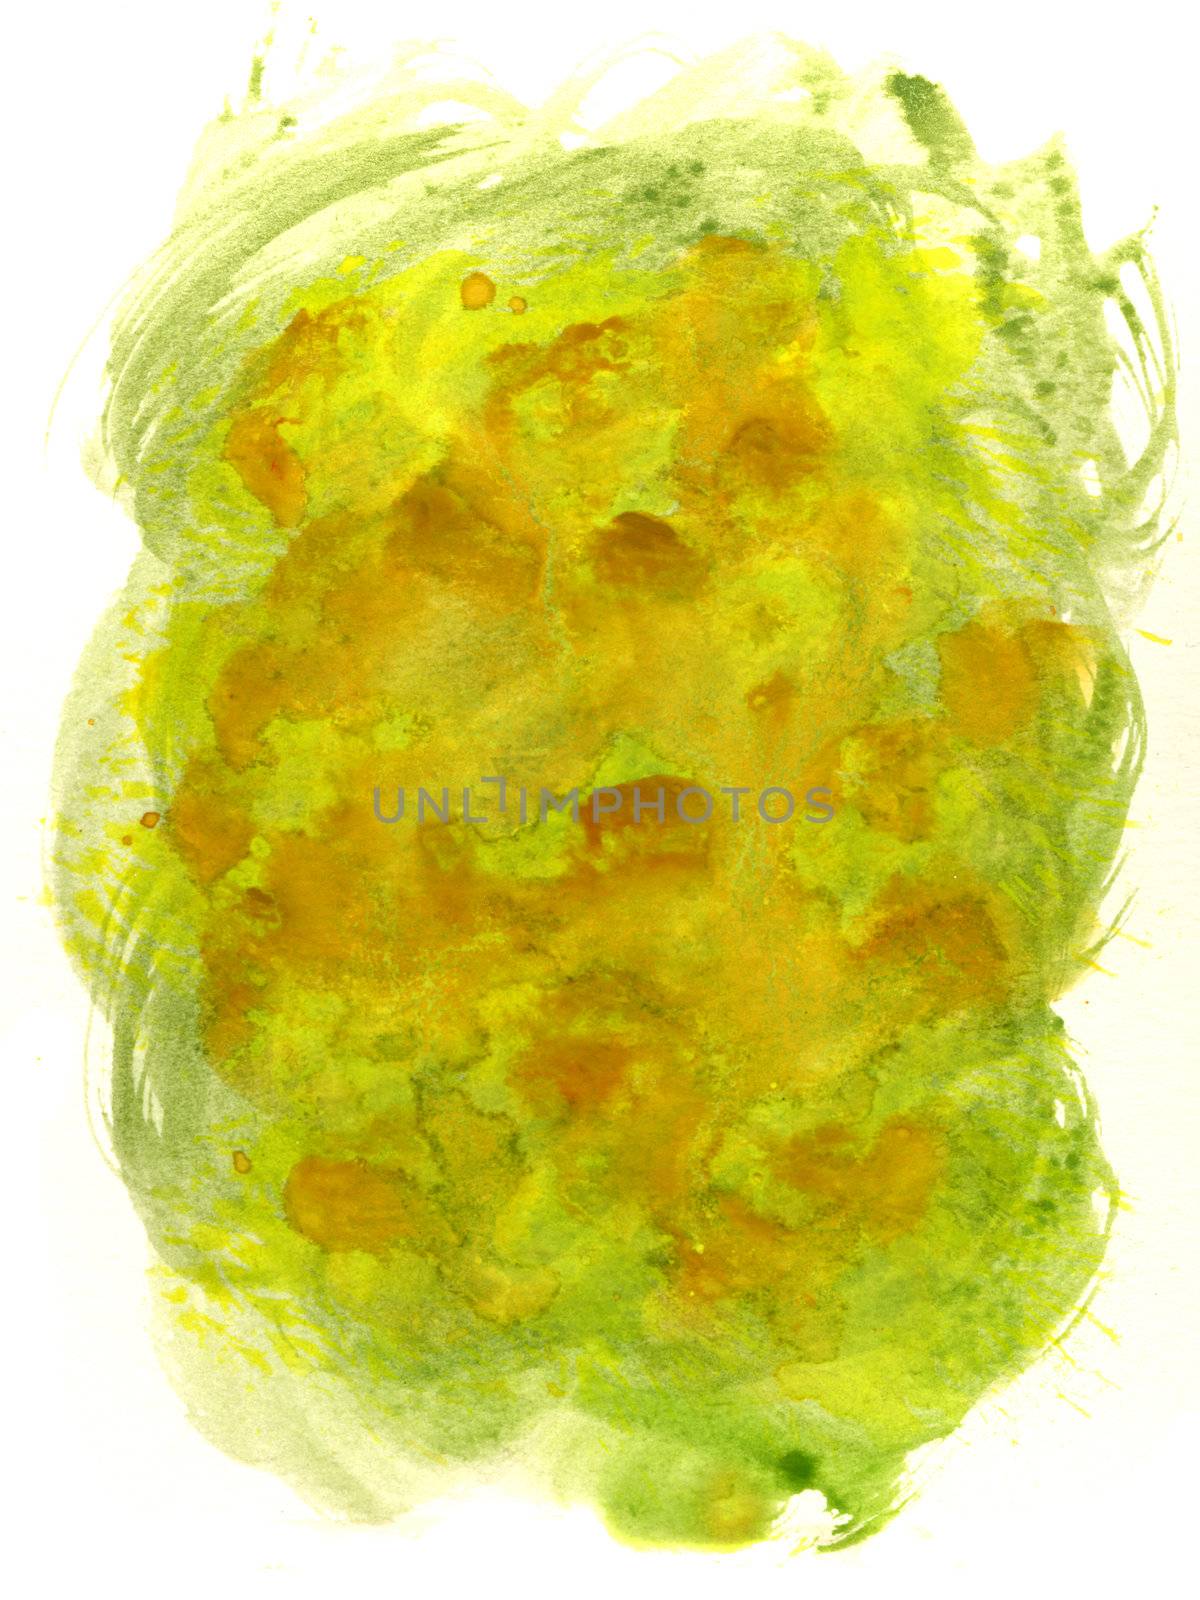 green, yellow, brown watercolor, abstract background hand painted (self made)